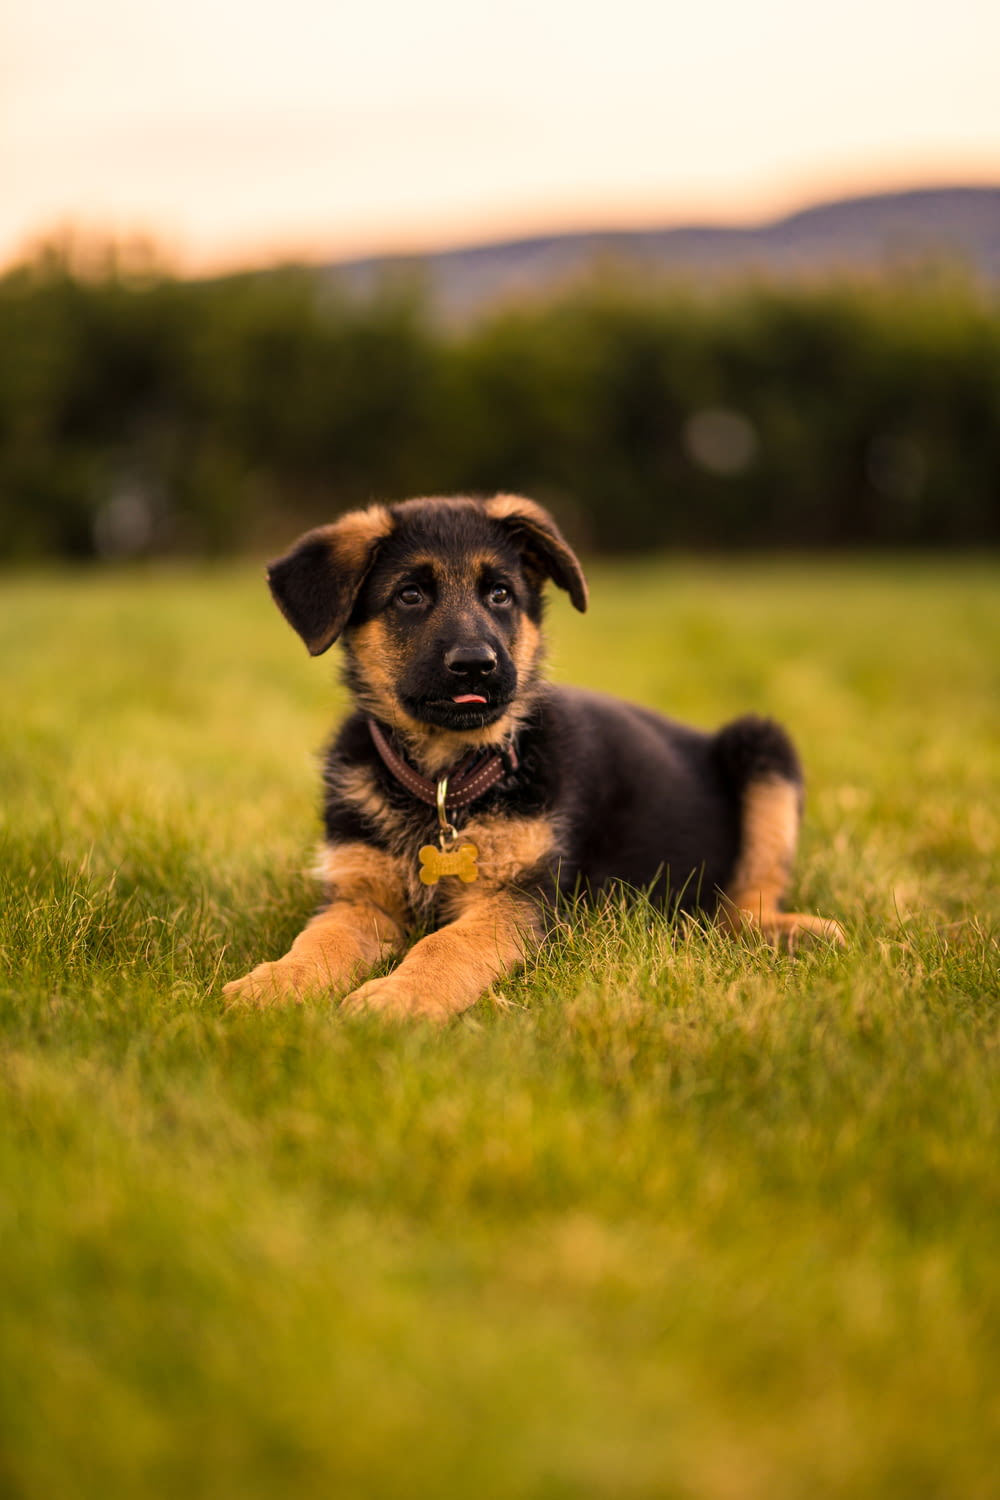 black and tan short coat puppy lying on green grass field during daytime